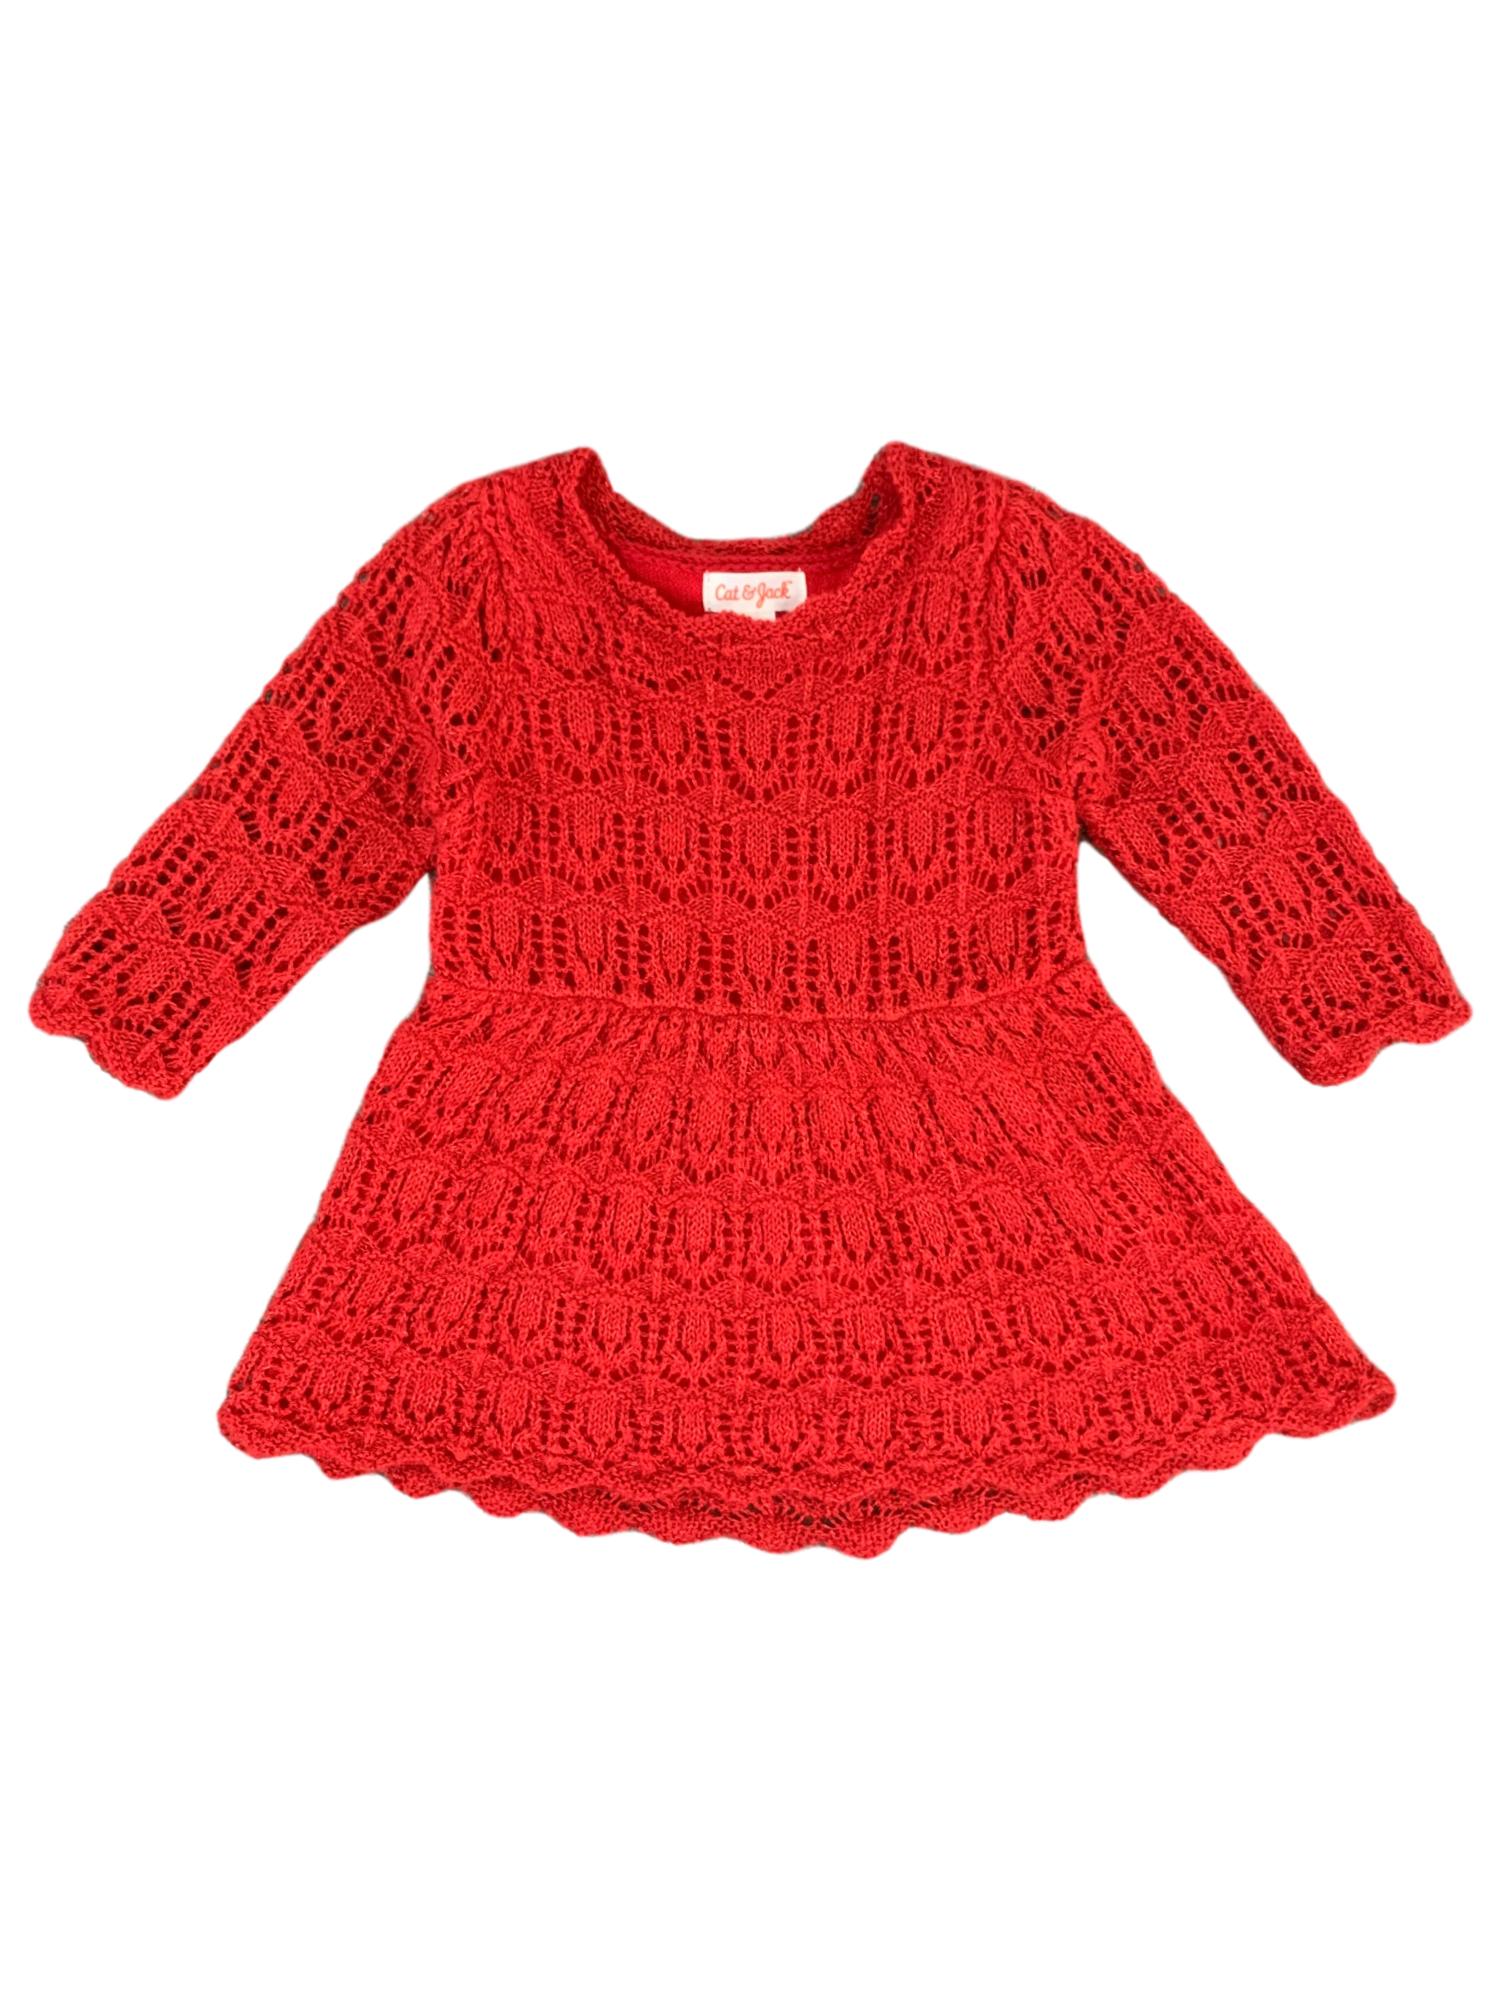 Cat & Jack Infant & Toddler Girls Red Crochet Sparkle Holiday Party Dress 12M